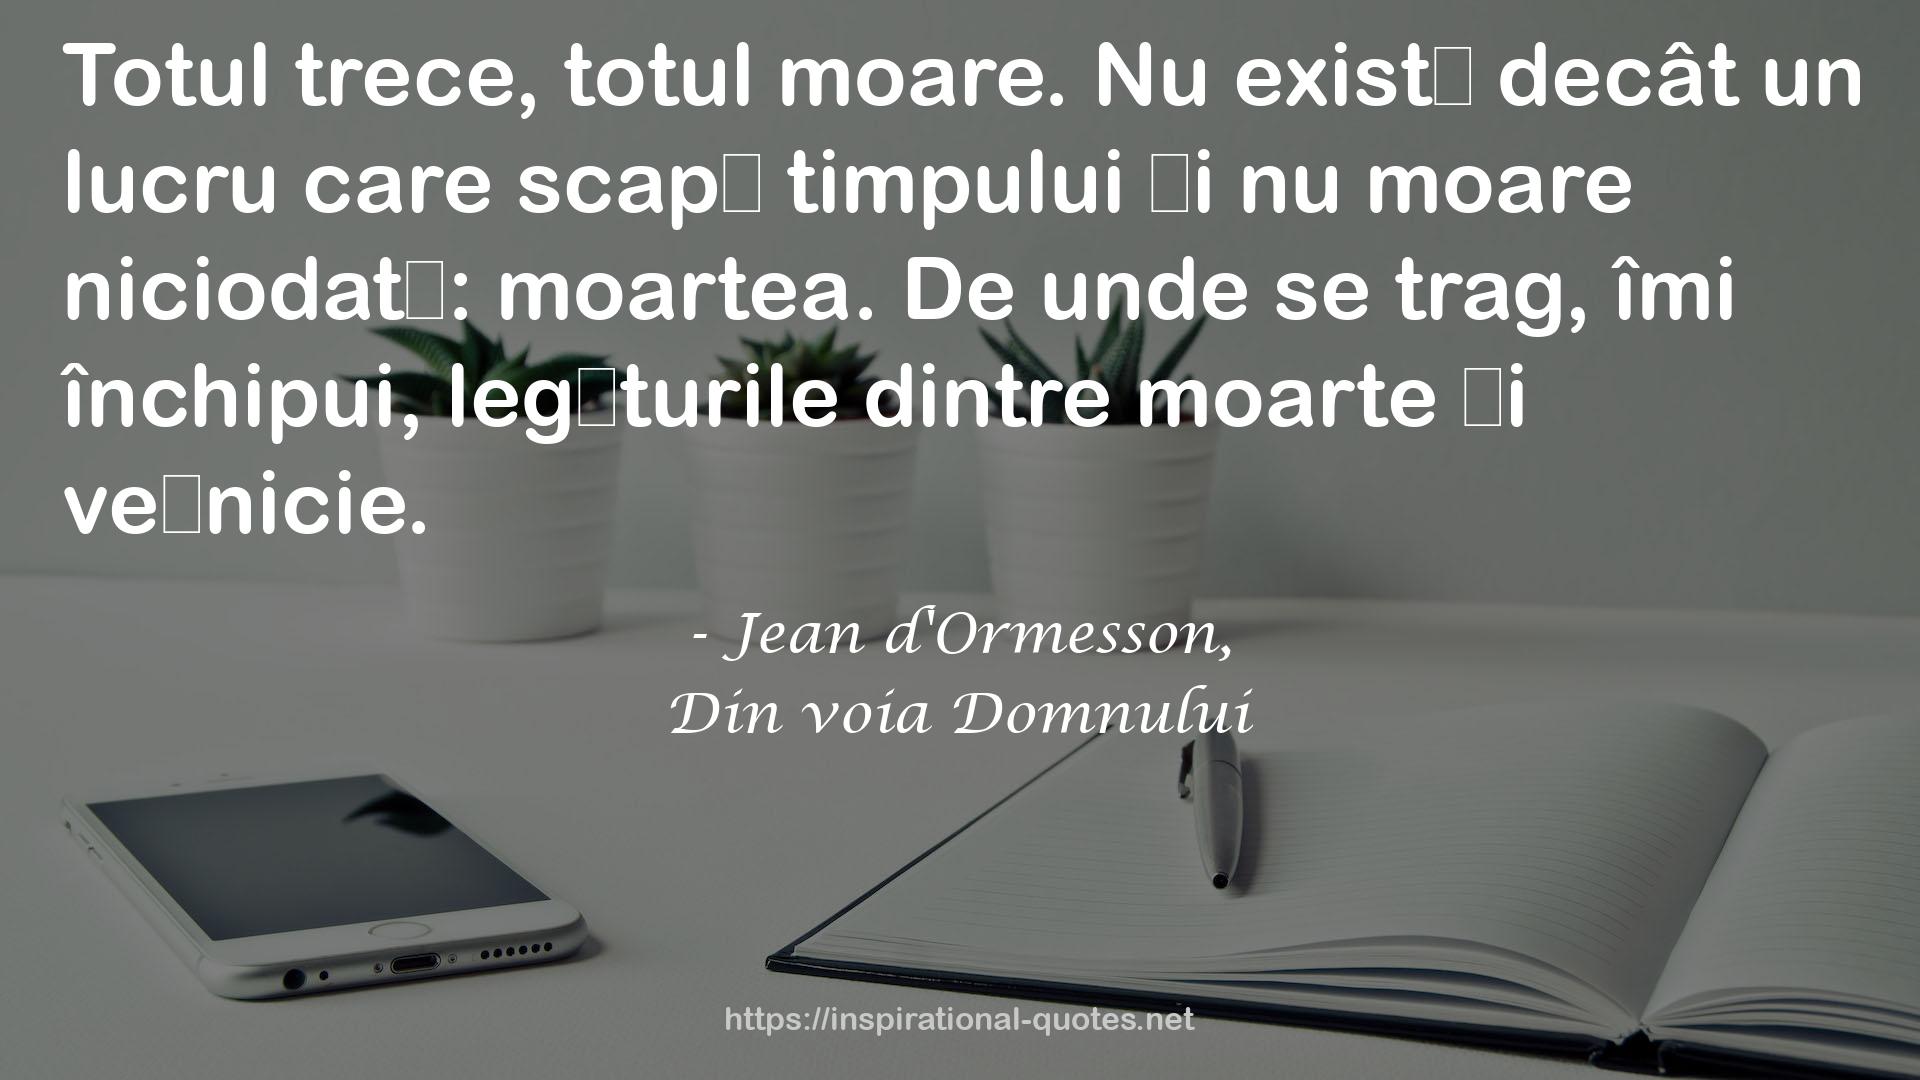 Jean d'Ormesson, QUOTES